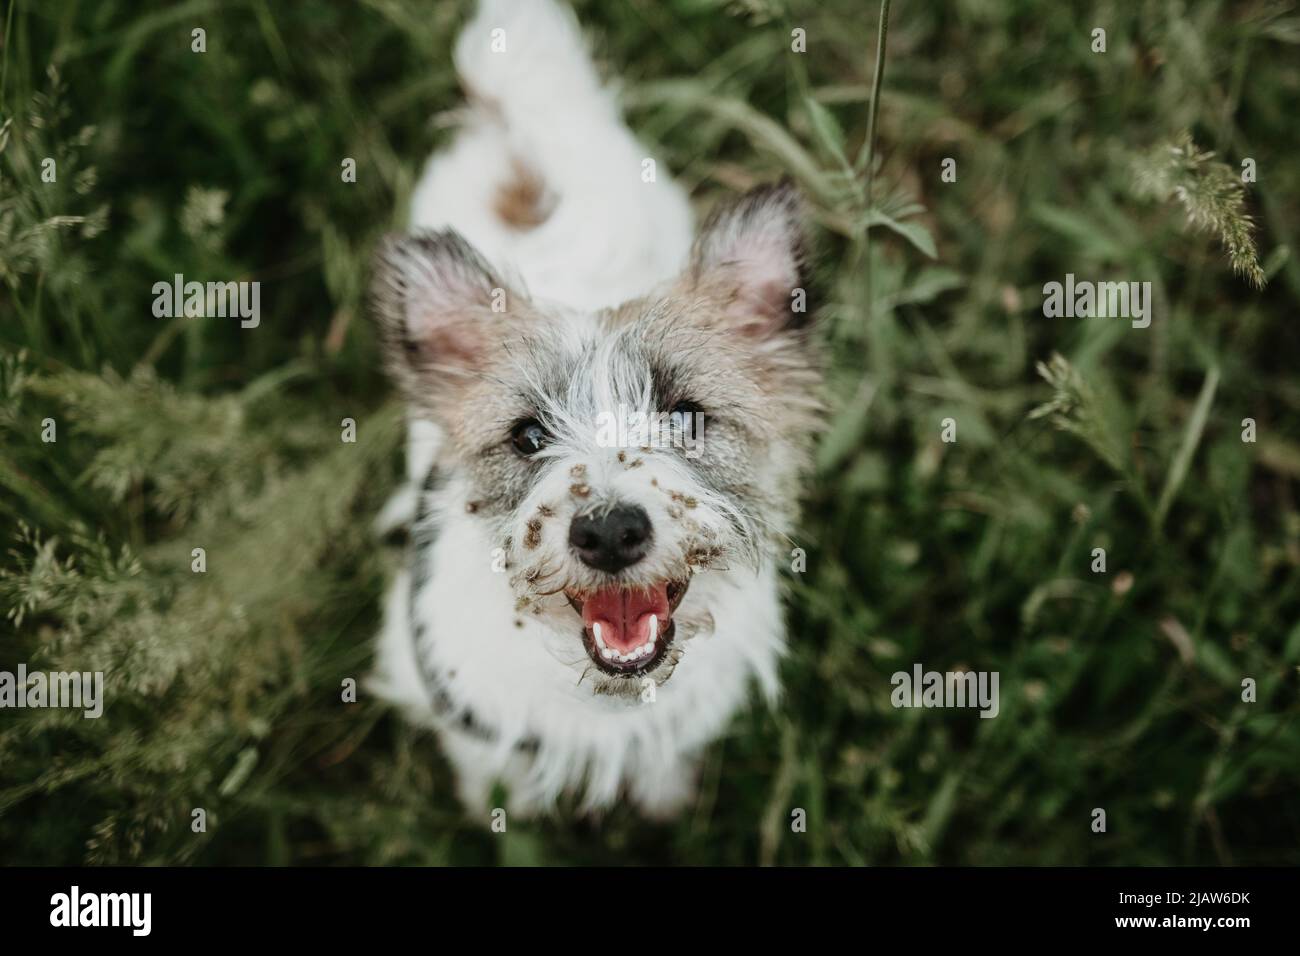 Jack russell puppy dog with  burdock burs on face on green grass Stock Photo